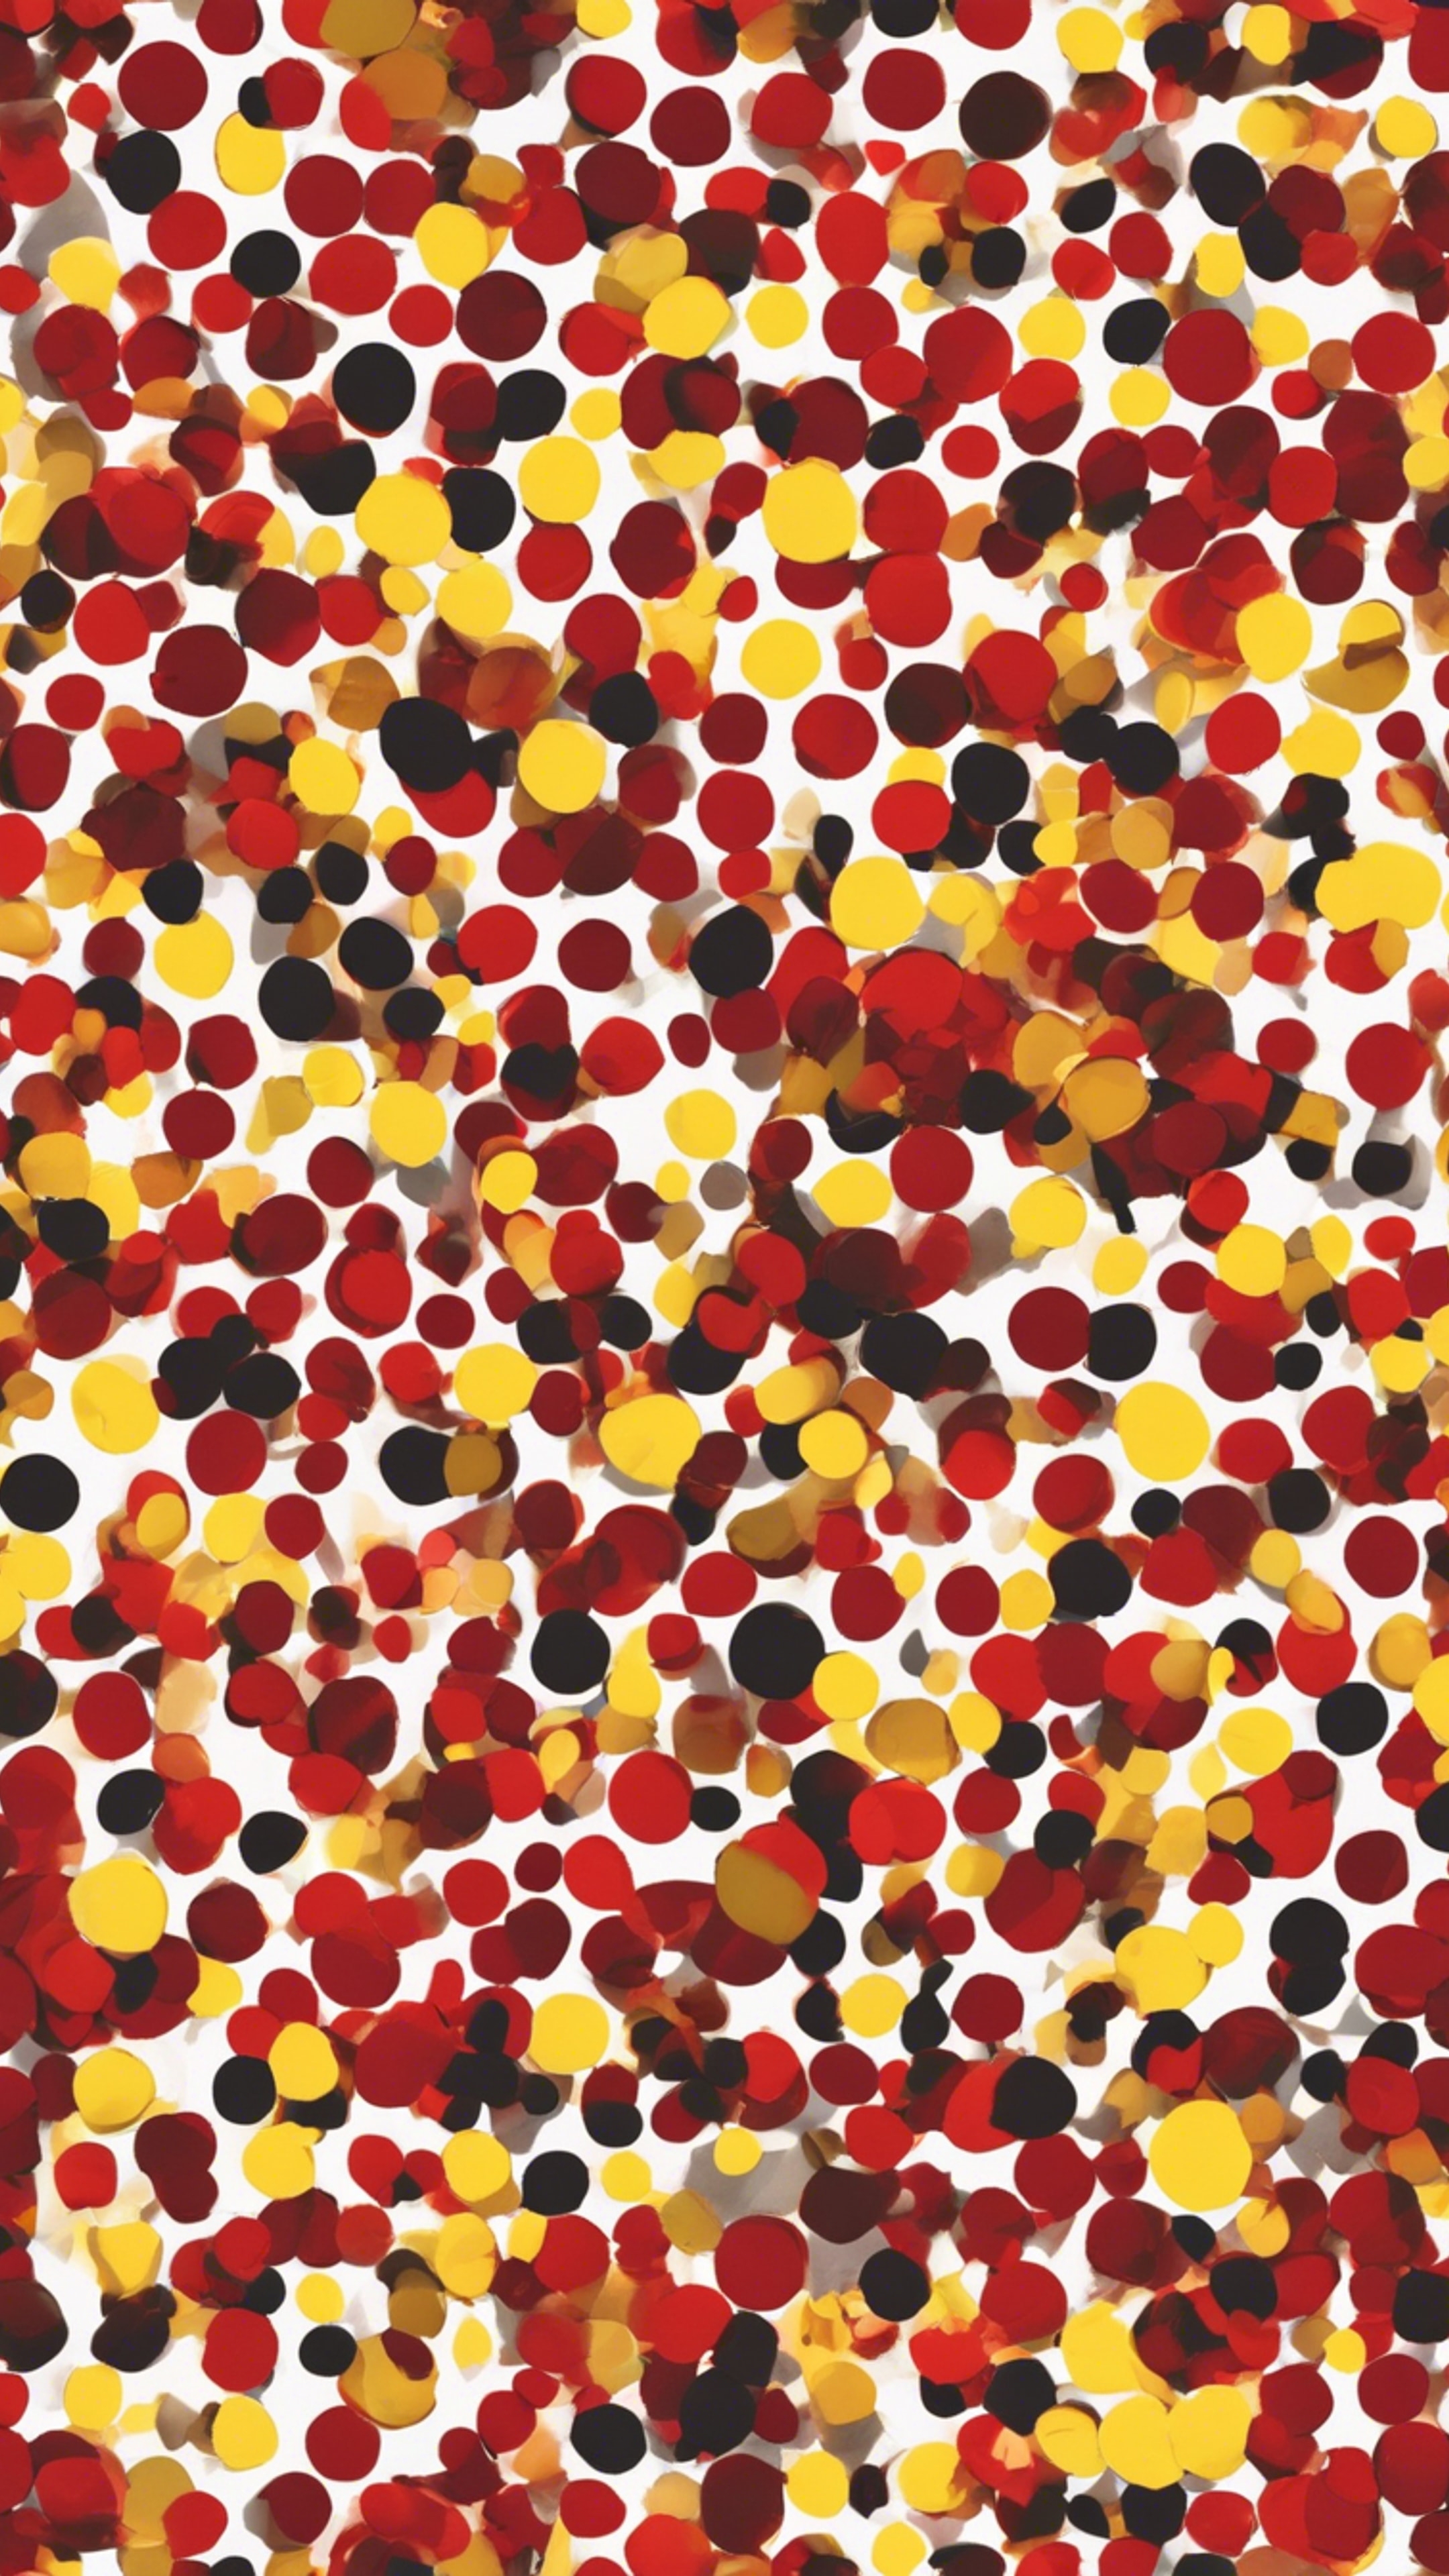 Scattered polka dots, small red ones and large yellow ones, in a seamless pattern. Wallpaper[491989b84cbb438494fe]